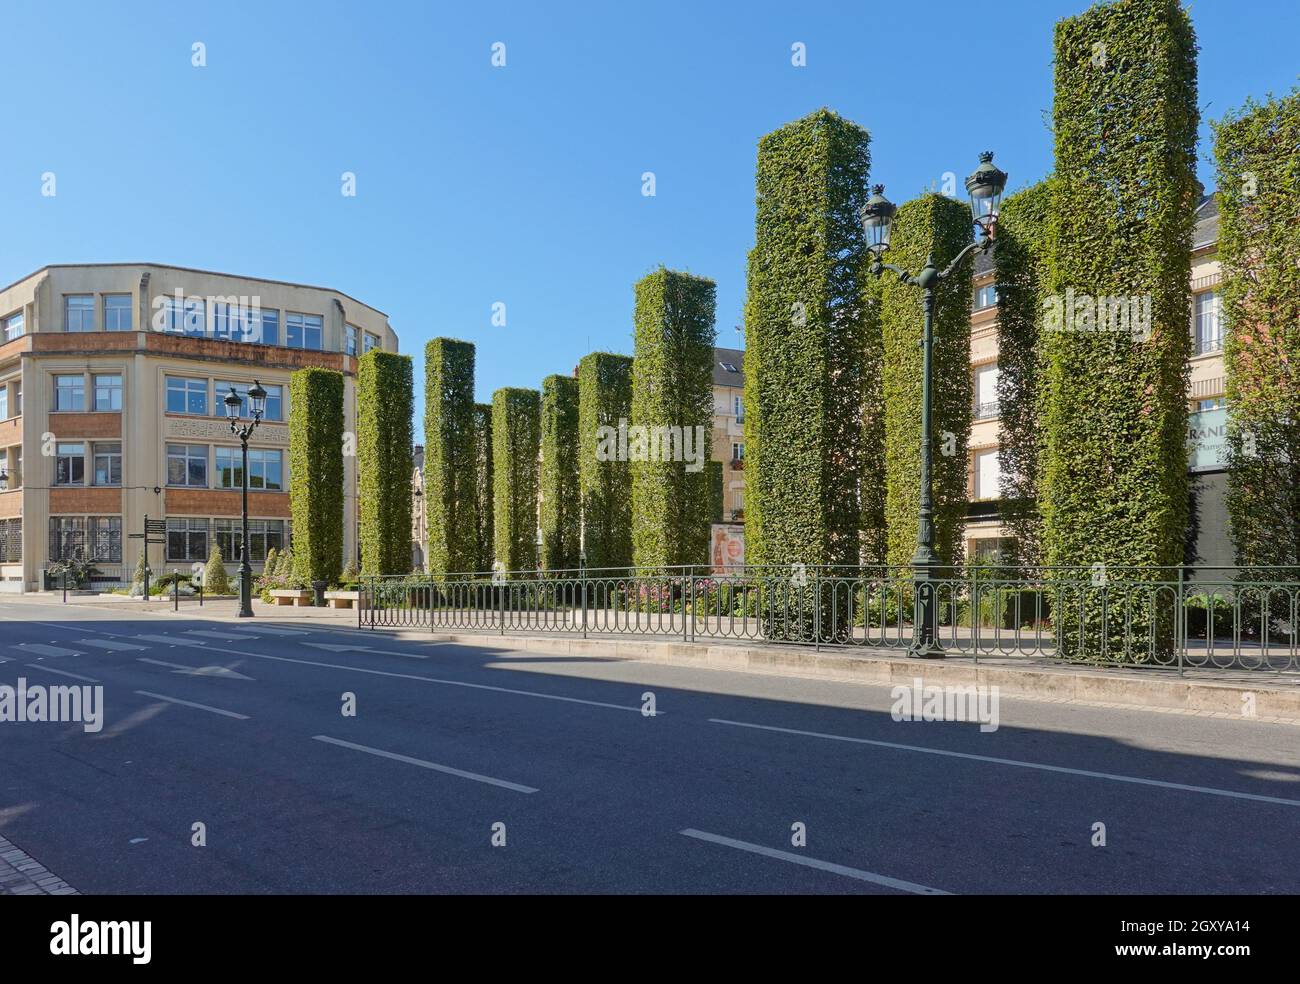 Orleans, Place Halmagrand Stockfoto